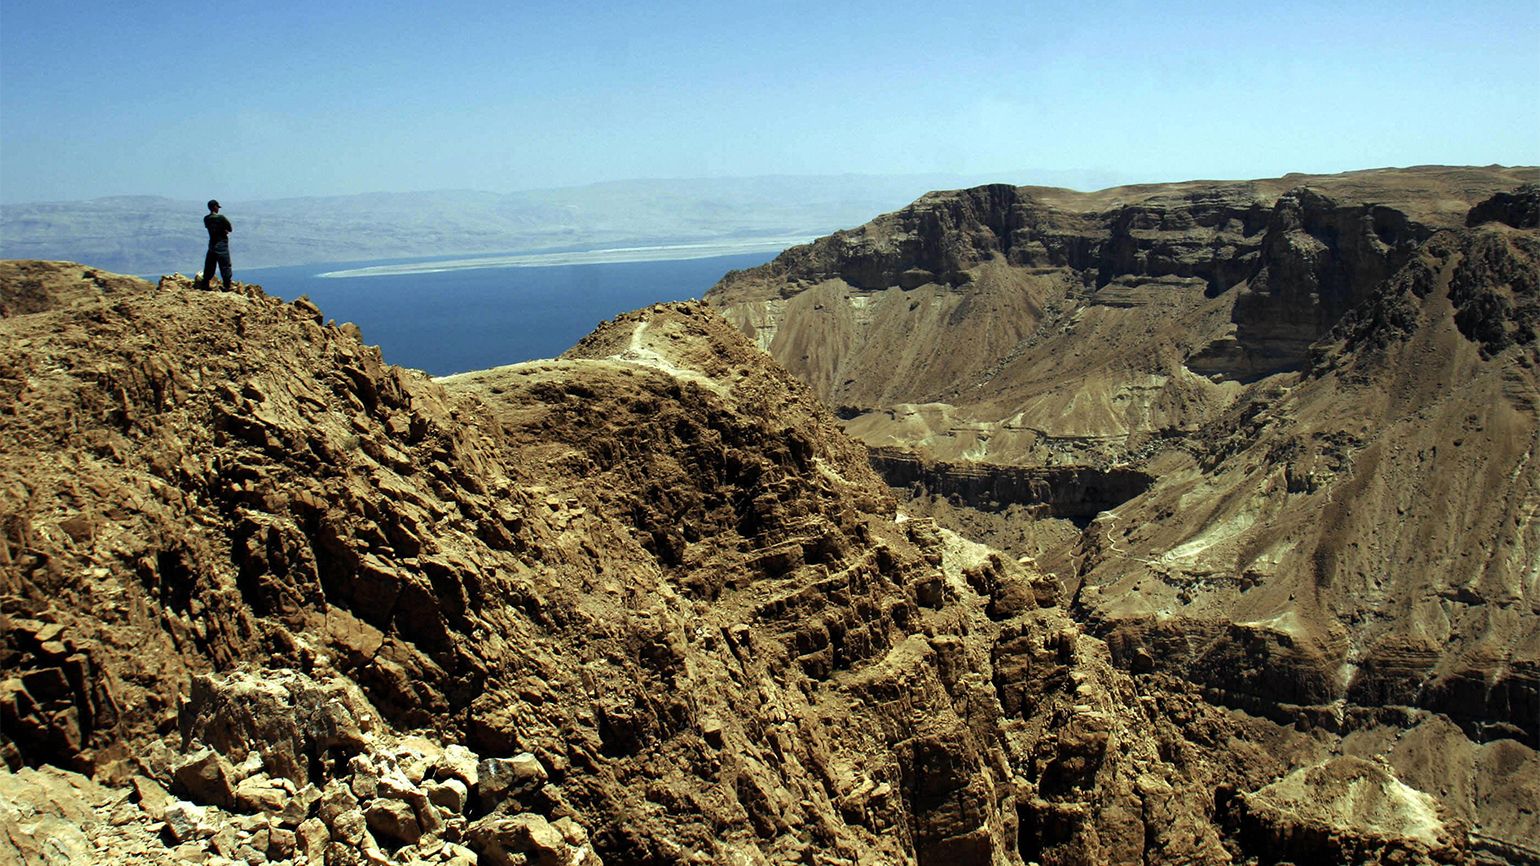 A lone figure stands upon the jagged rocks of Qumran and gazes out over the Dead Sea